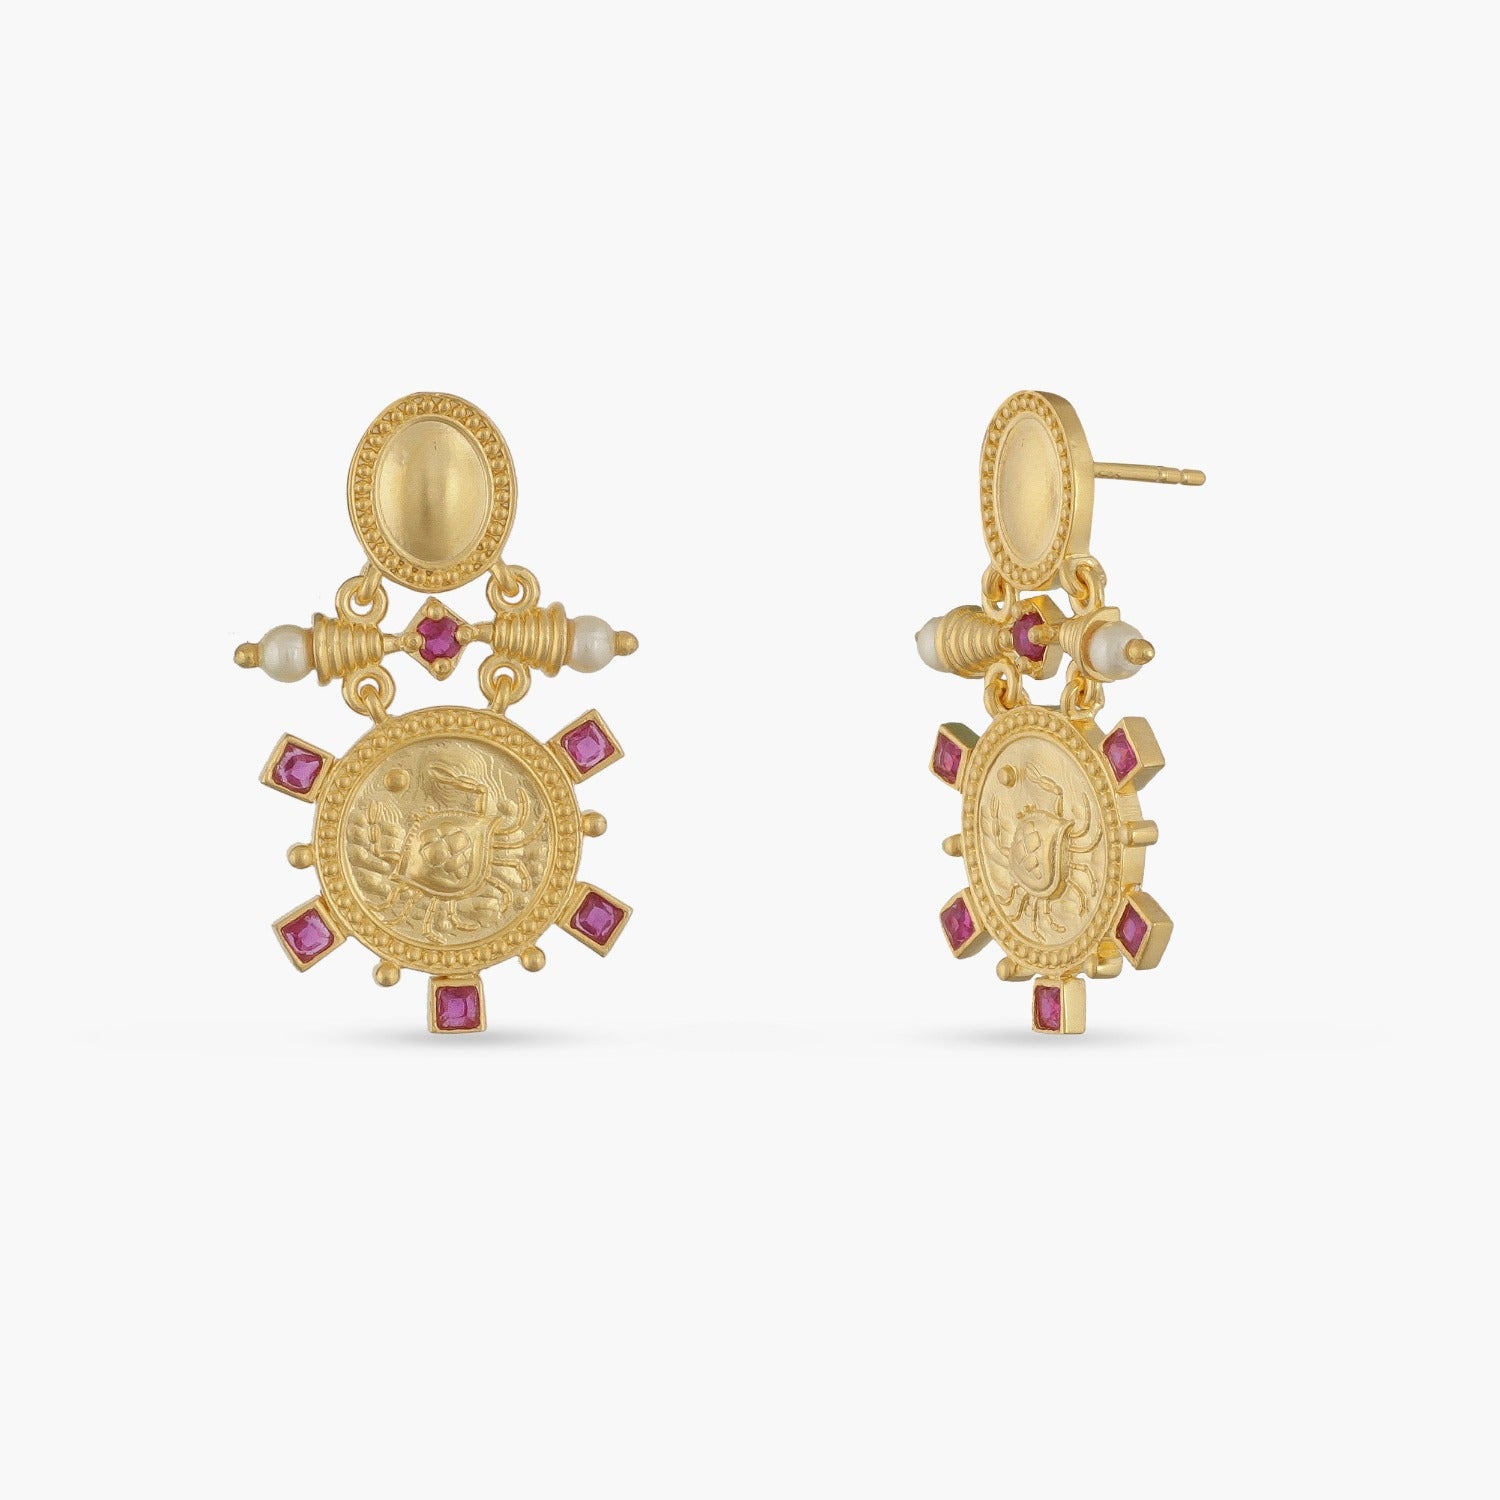 Golden Flower Tear Drop Earrings - Bollywood Collection - Radhika Store